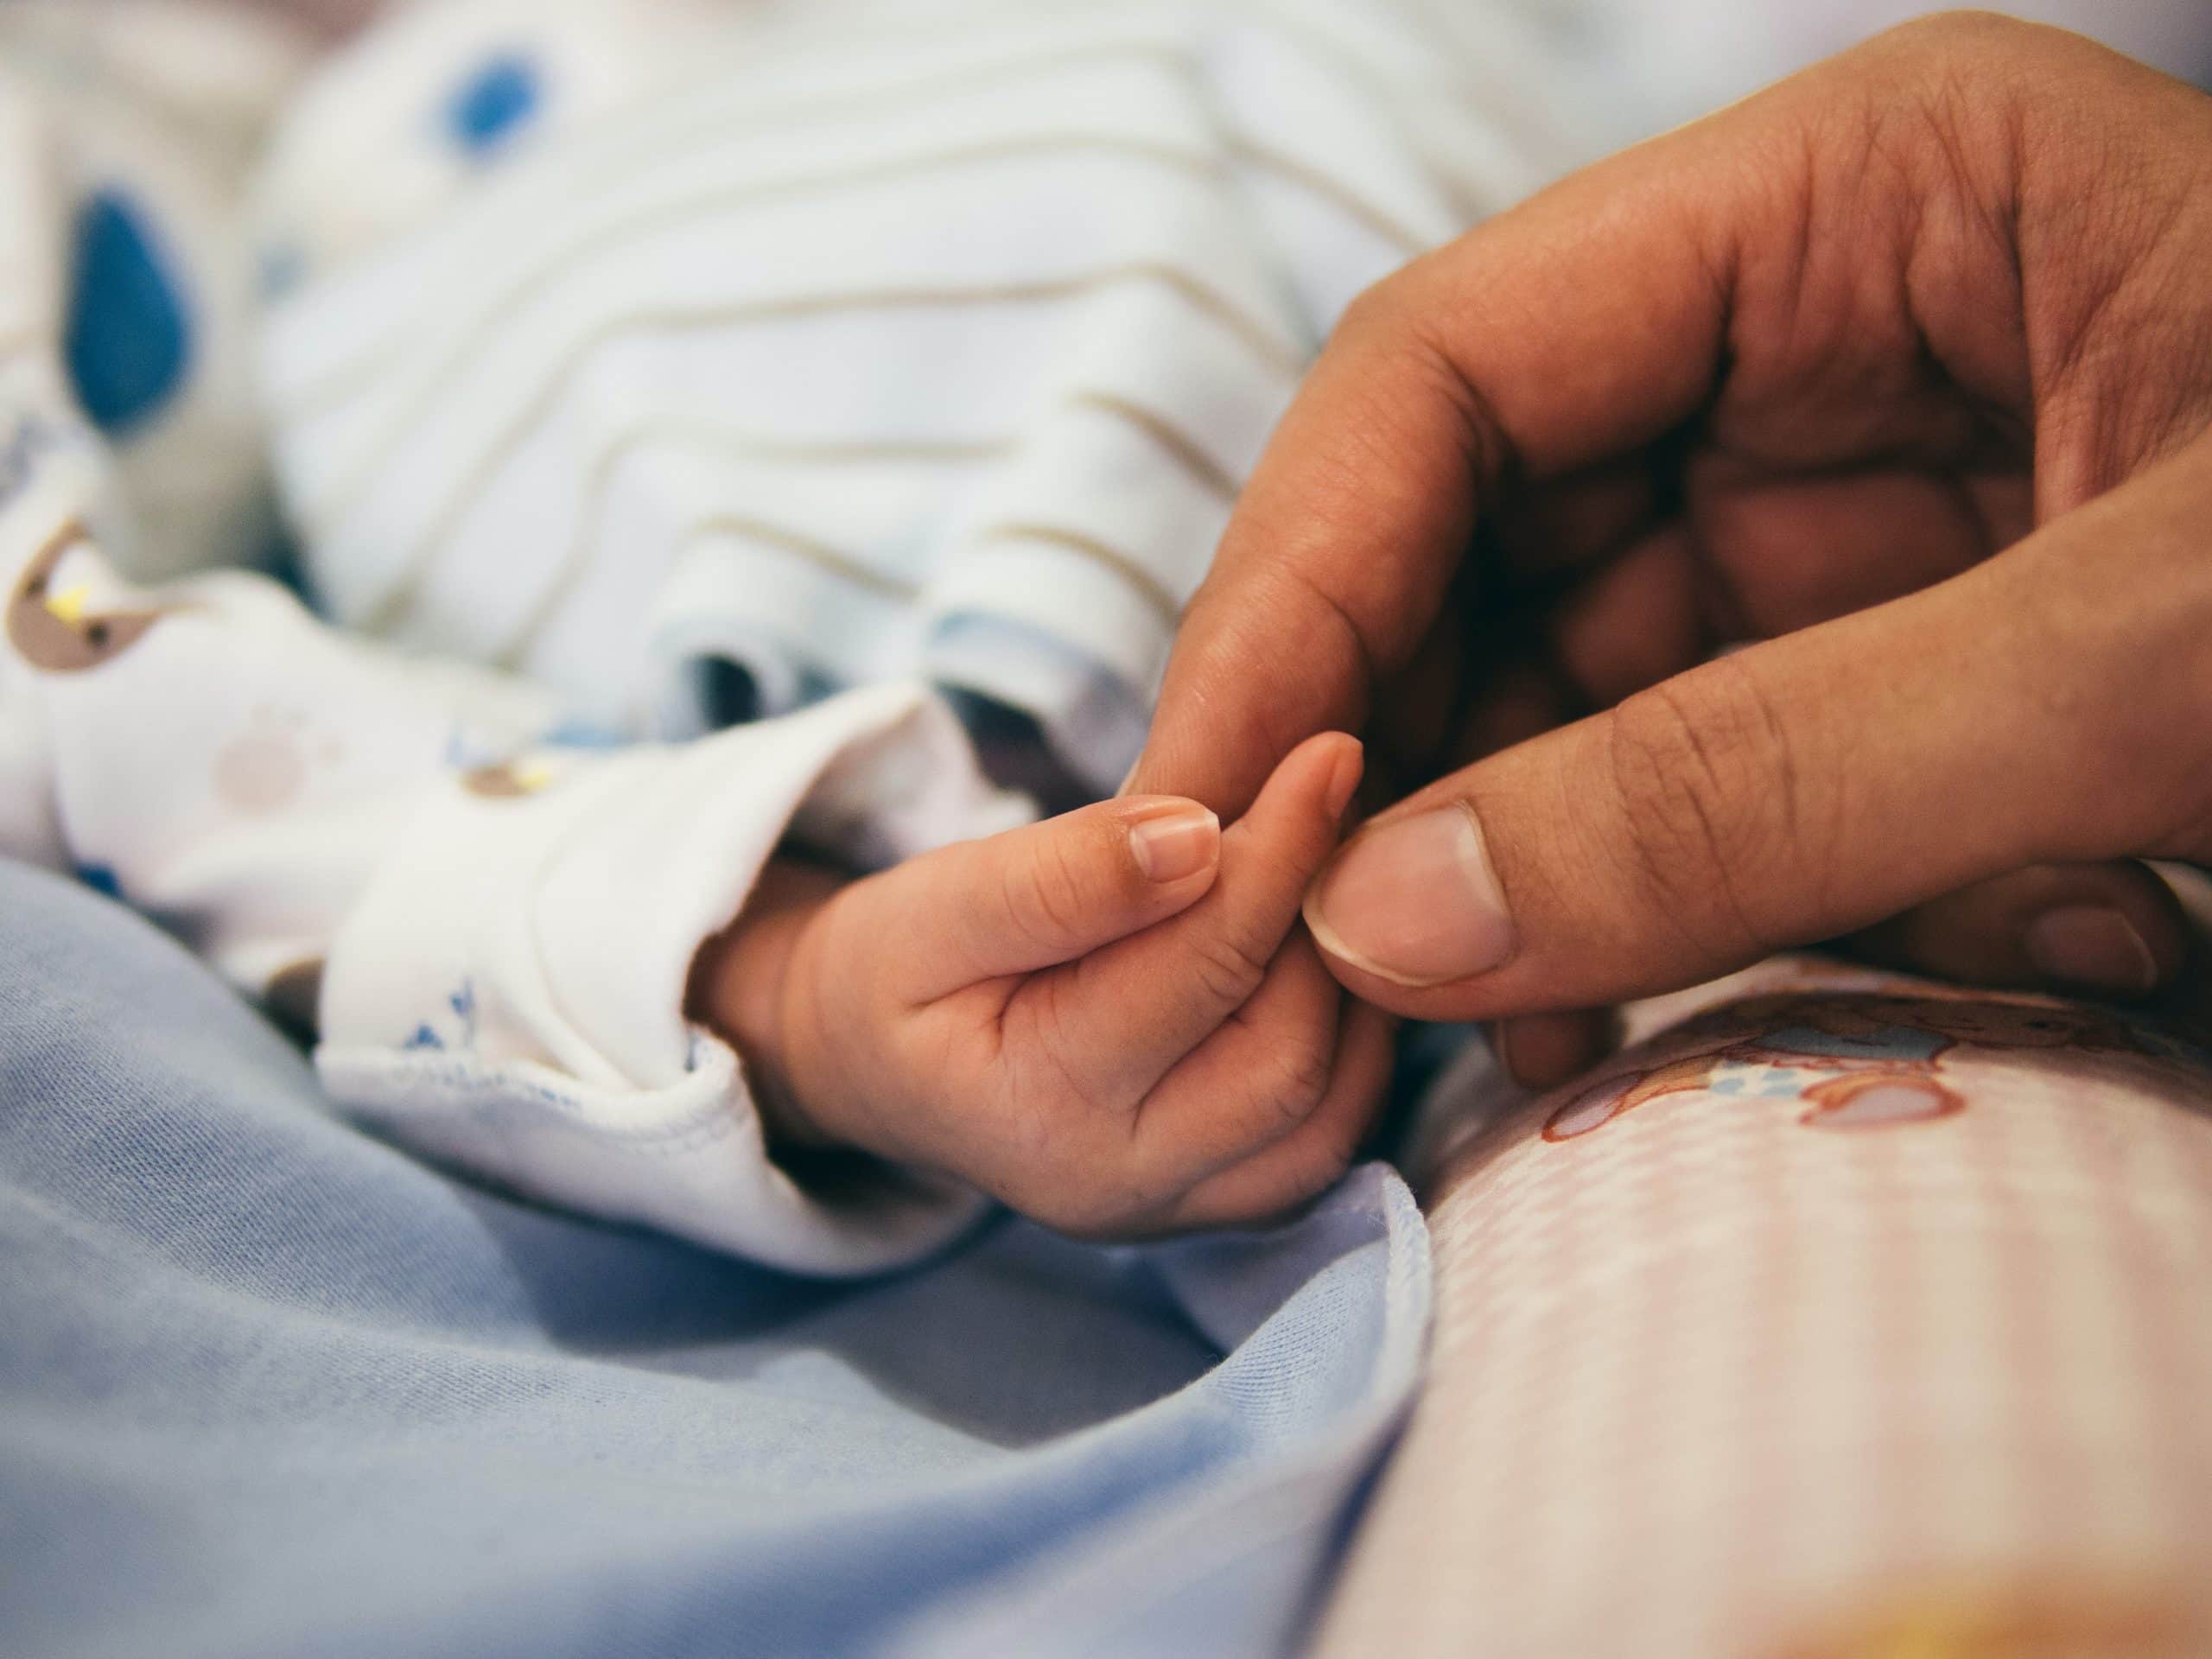 Signs Your Child May Have Sustained a Birth Injury